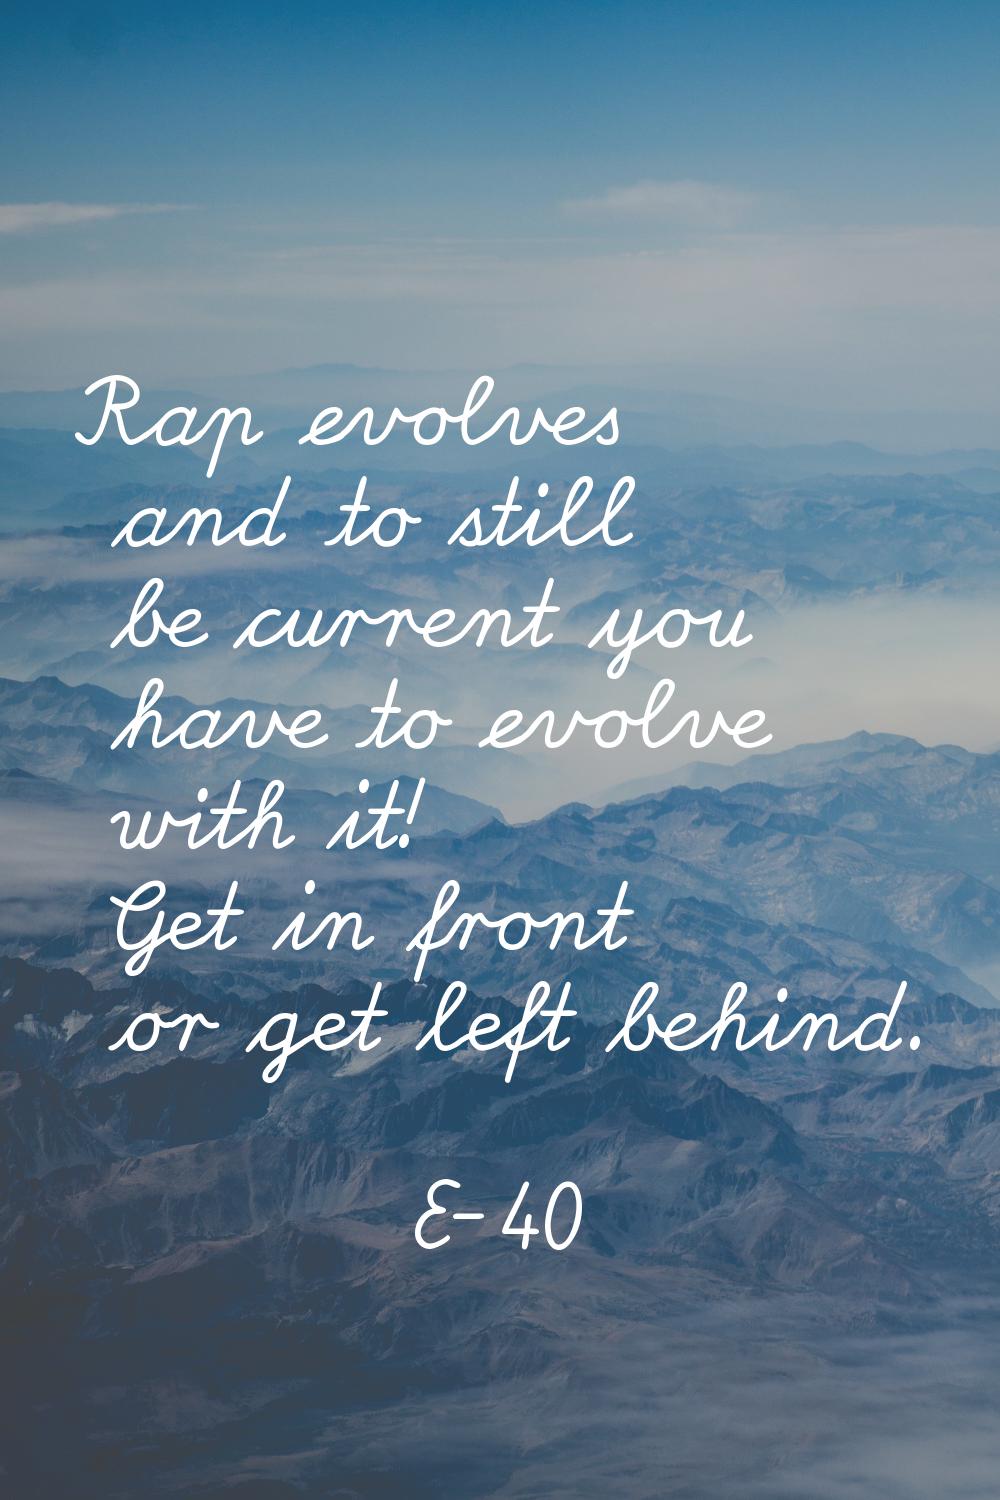 Rap evolves and to still be current you have to evolve with it! Get in front or get left behind.